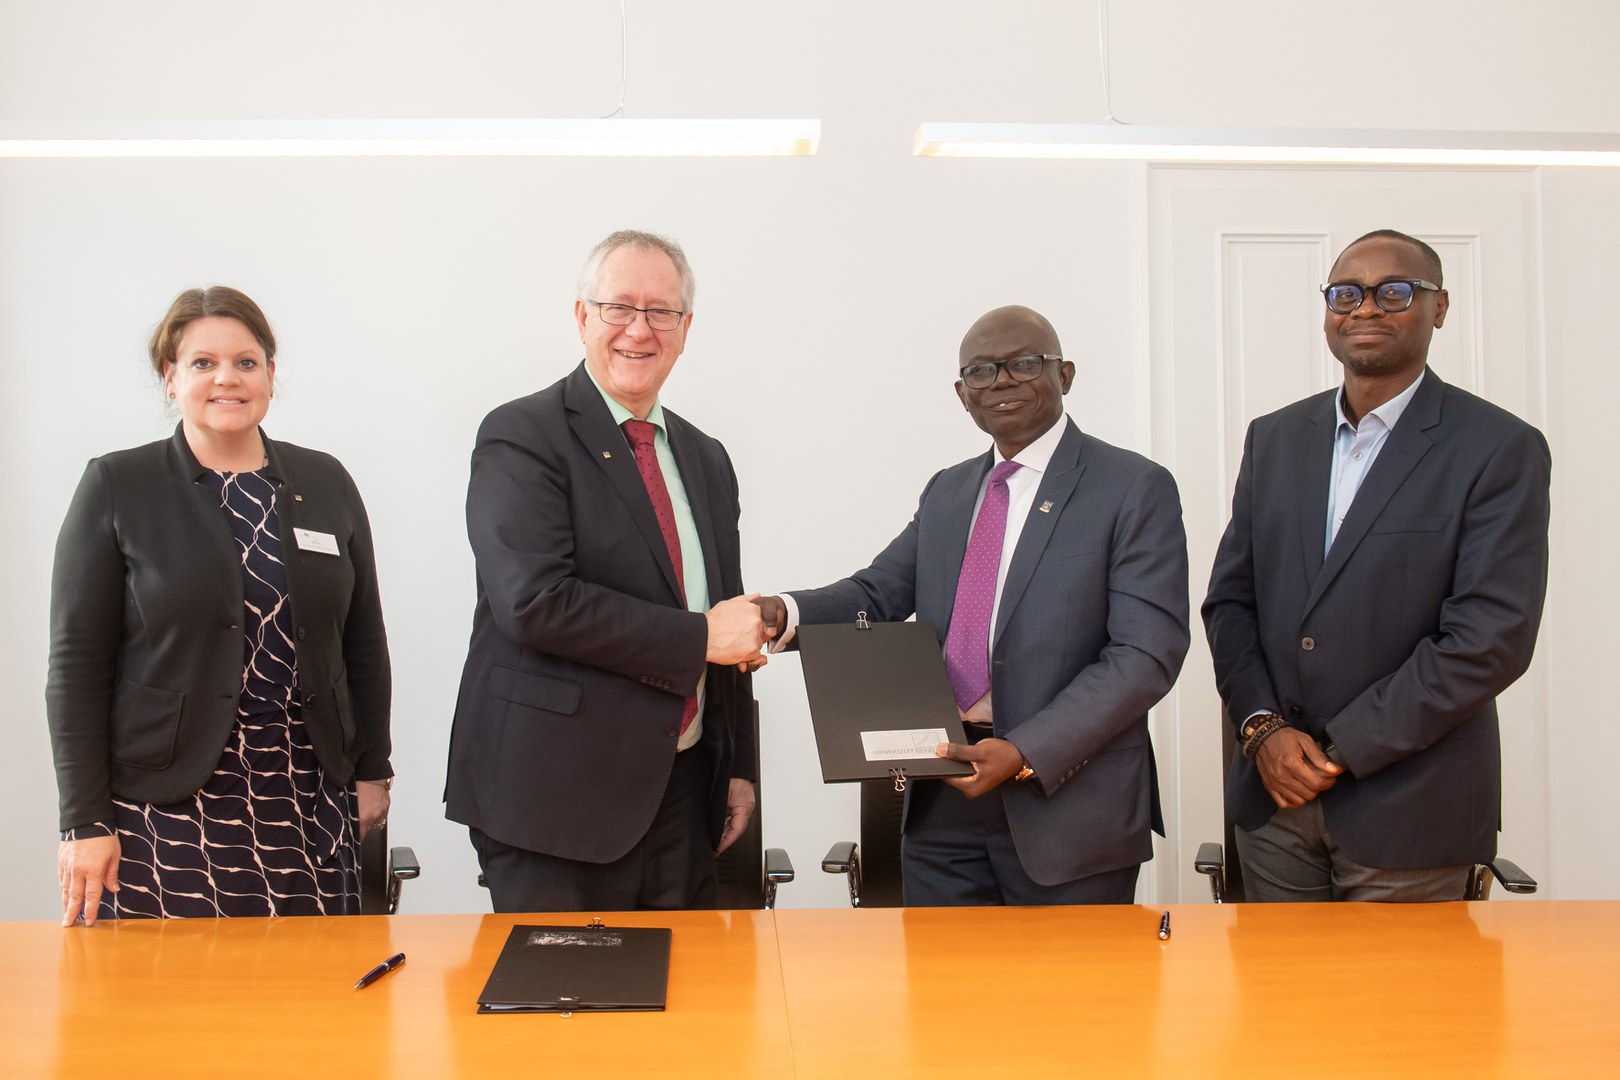 With the signing of the Collaborative Teaching Agreement, both universities decided on the framework for joint teaching in the Katekisama program.